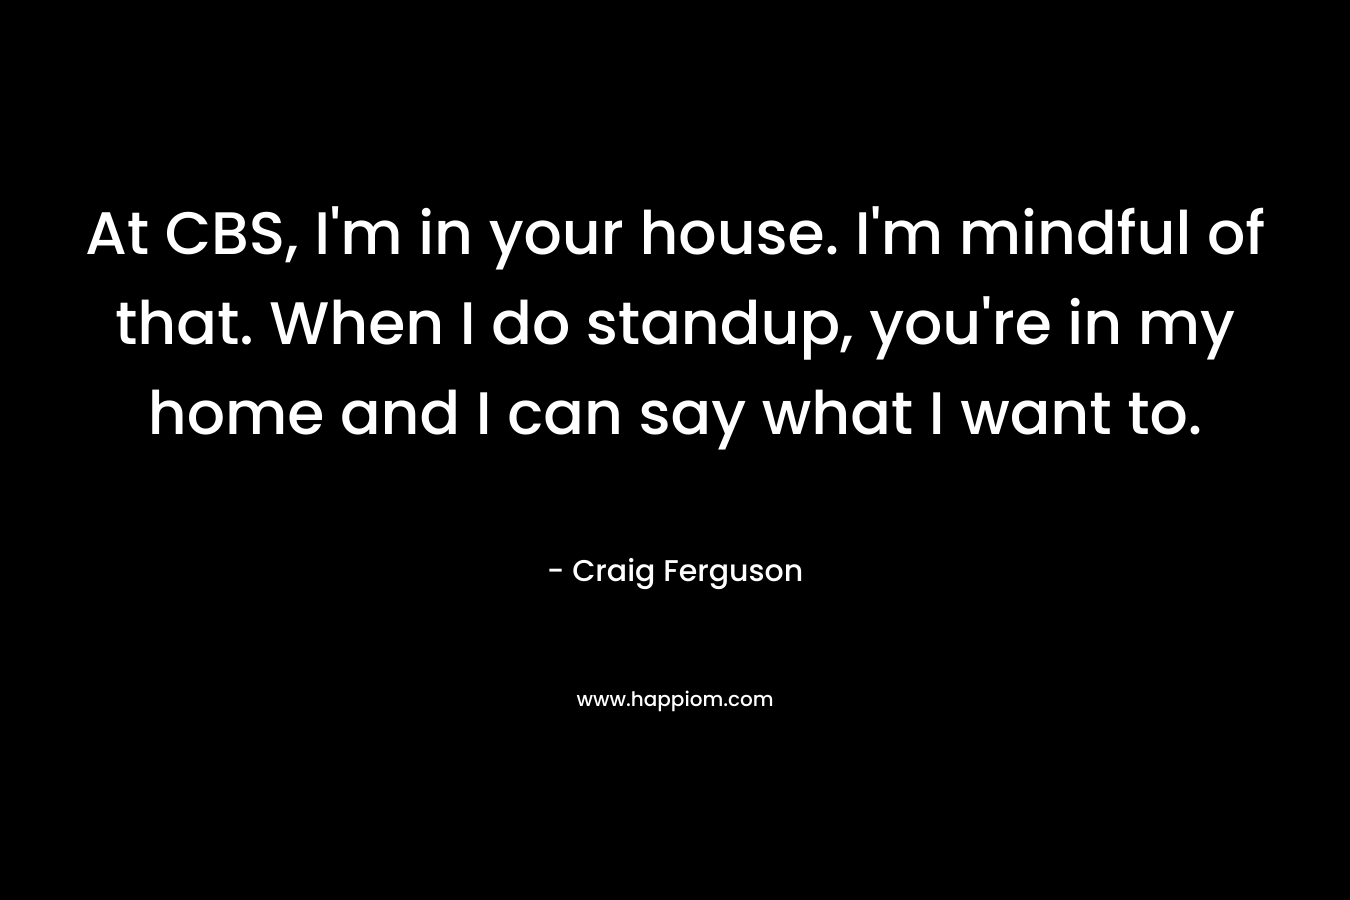 At CBS, I'm in your house. I'm mindful of that. When I do standup, you're in my home and I can say what I want to.